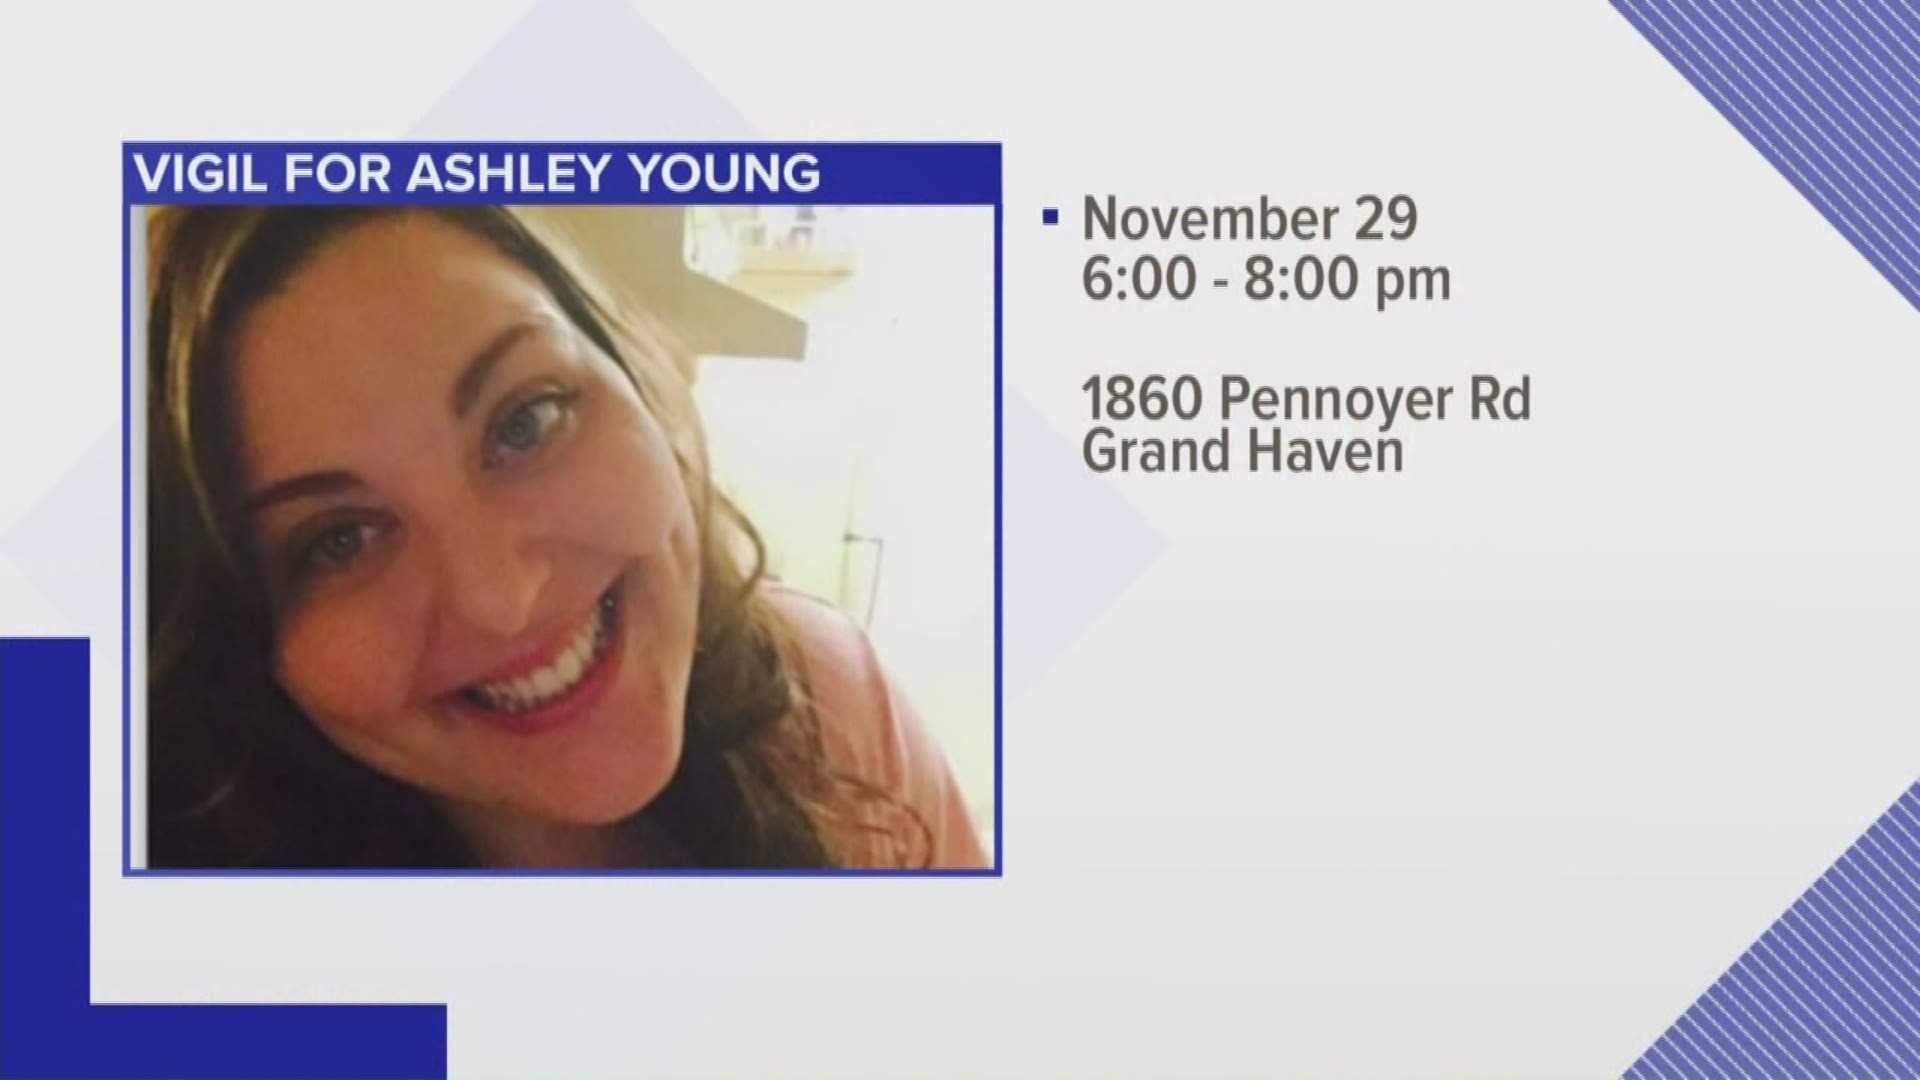 Ashley Young was murdered by Jared Chance on Nov. 29, 2018.